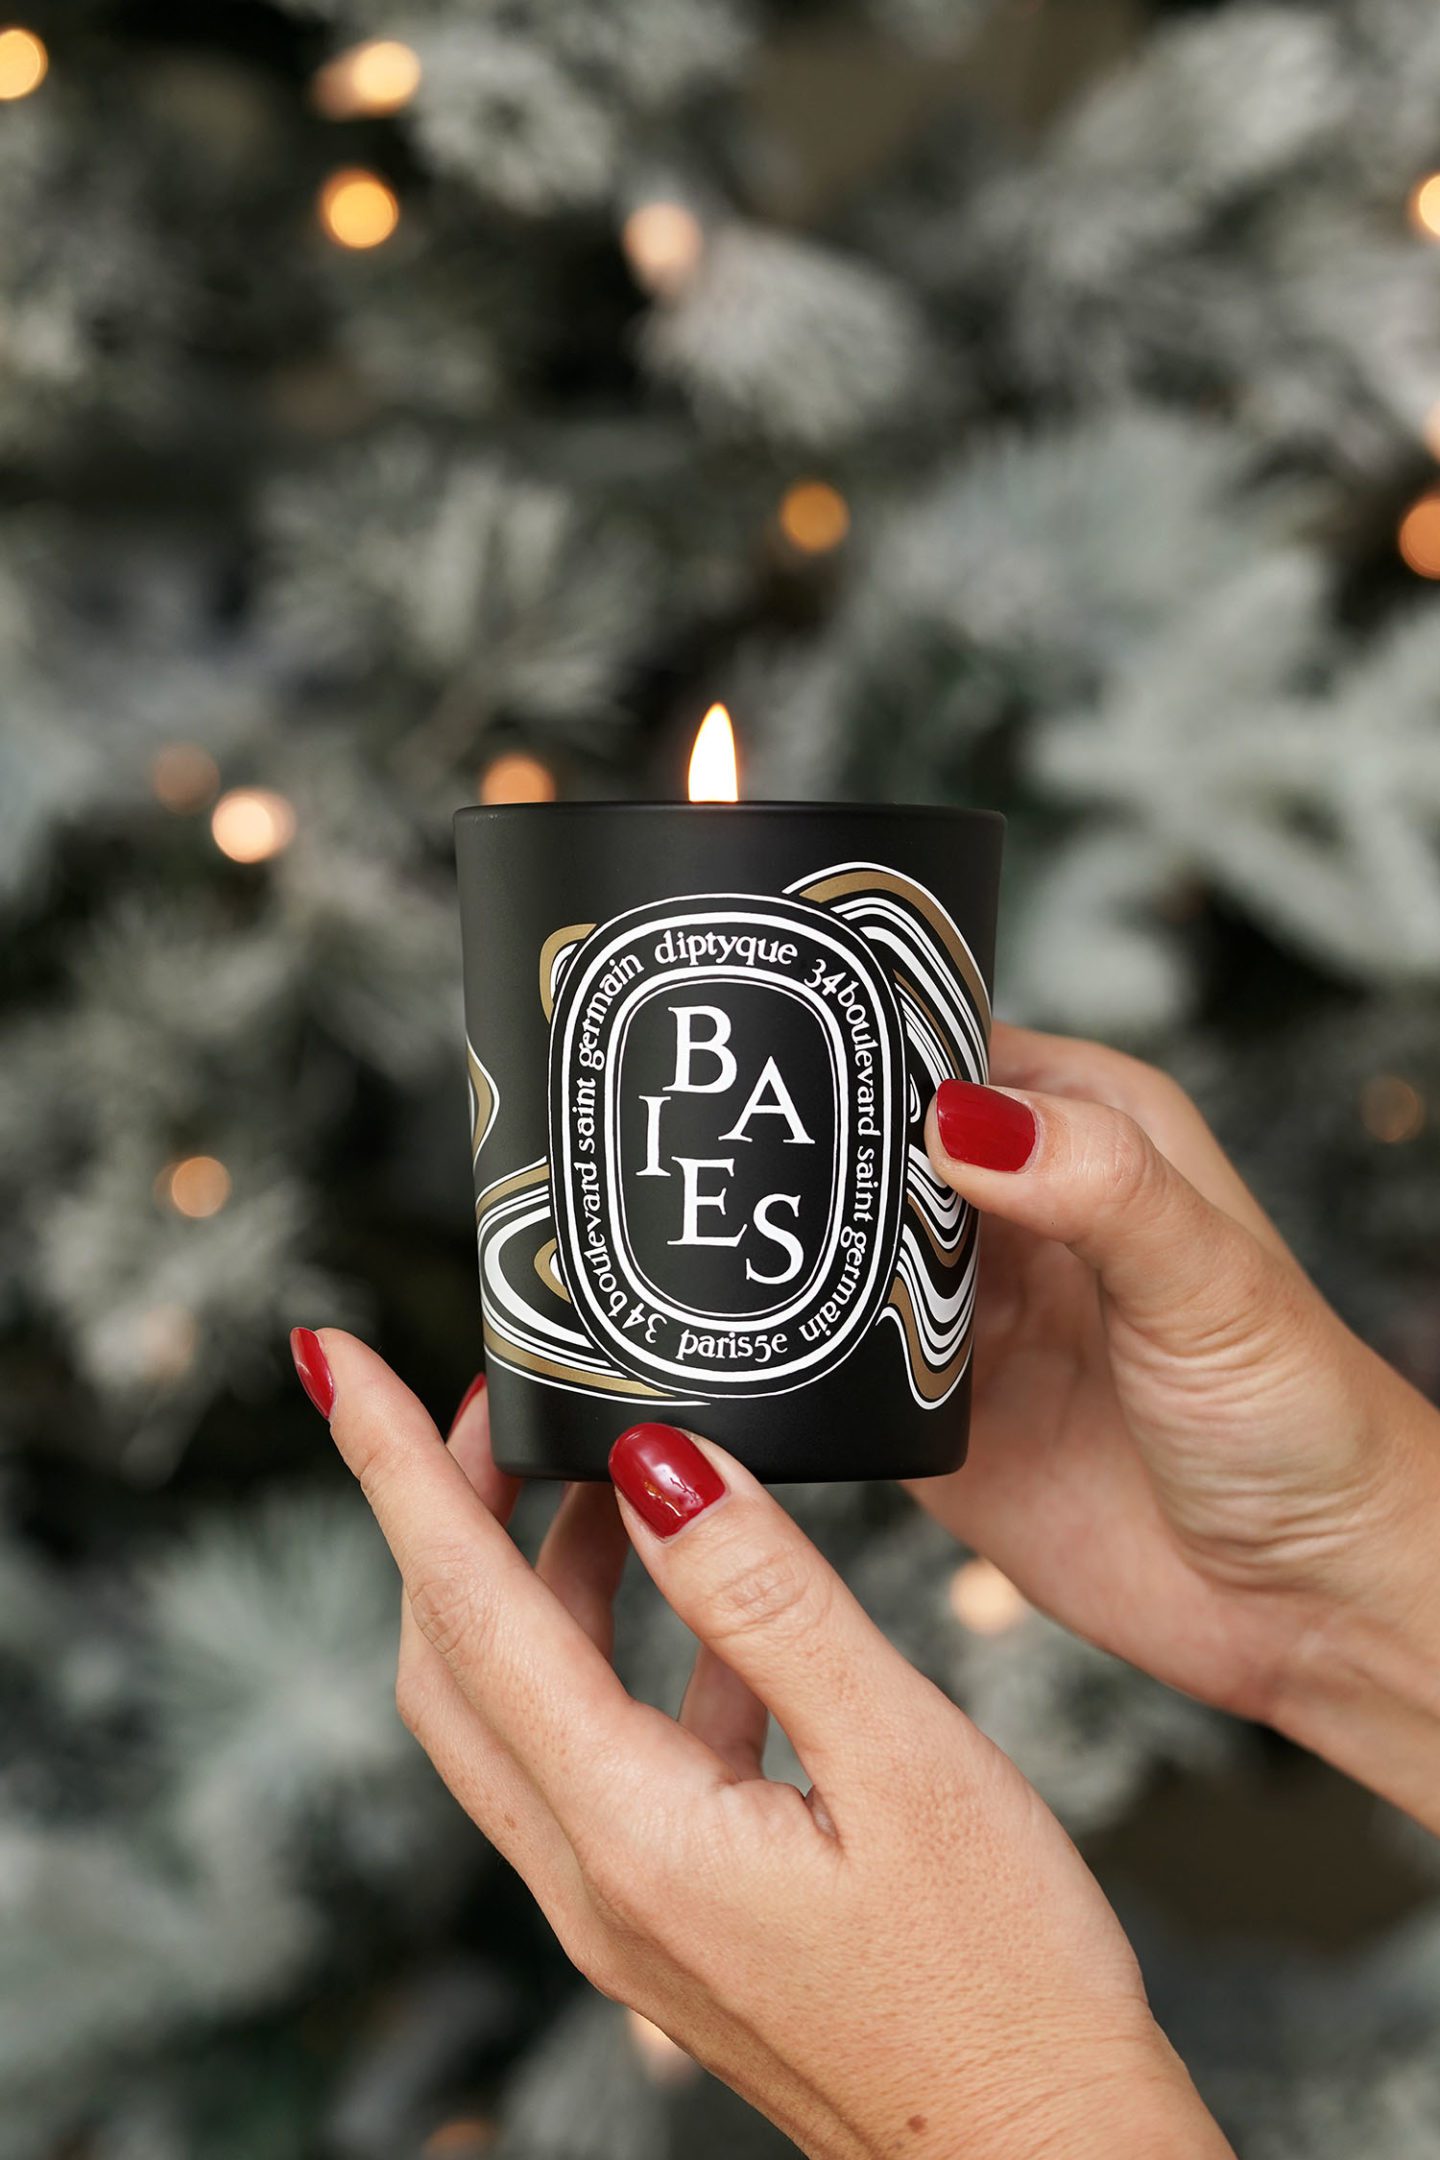 Diptyque Black Friday Baies Candle 2021 